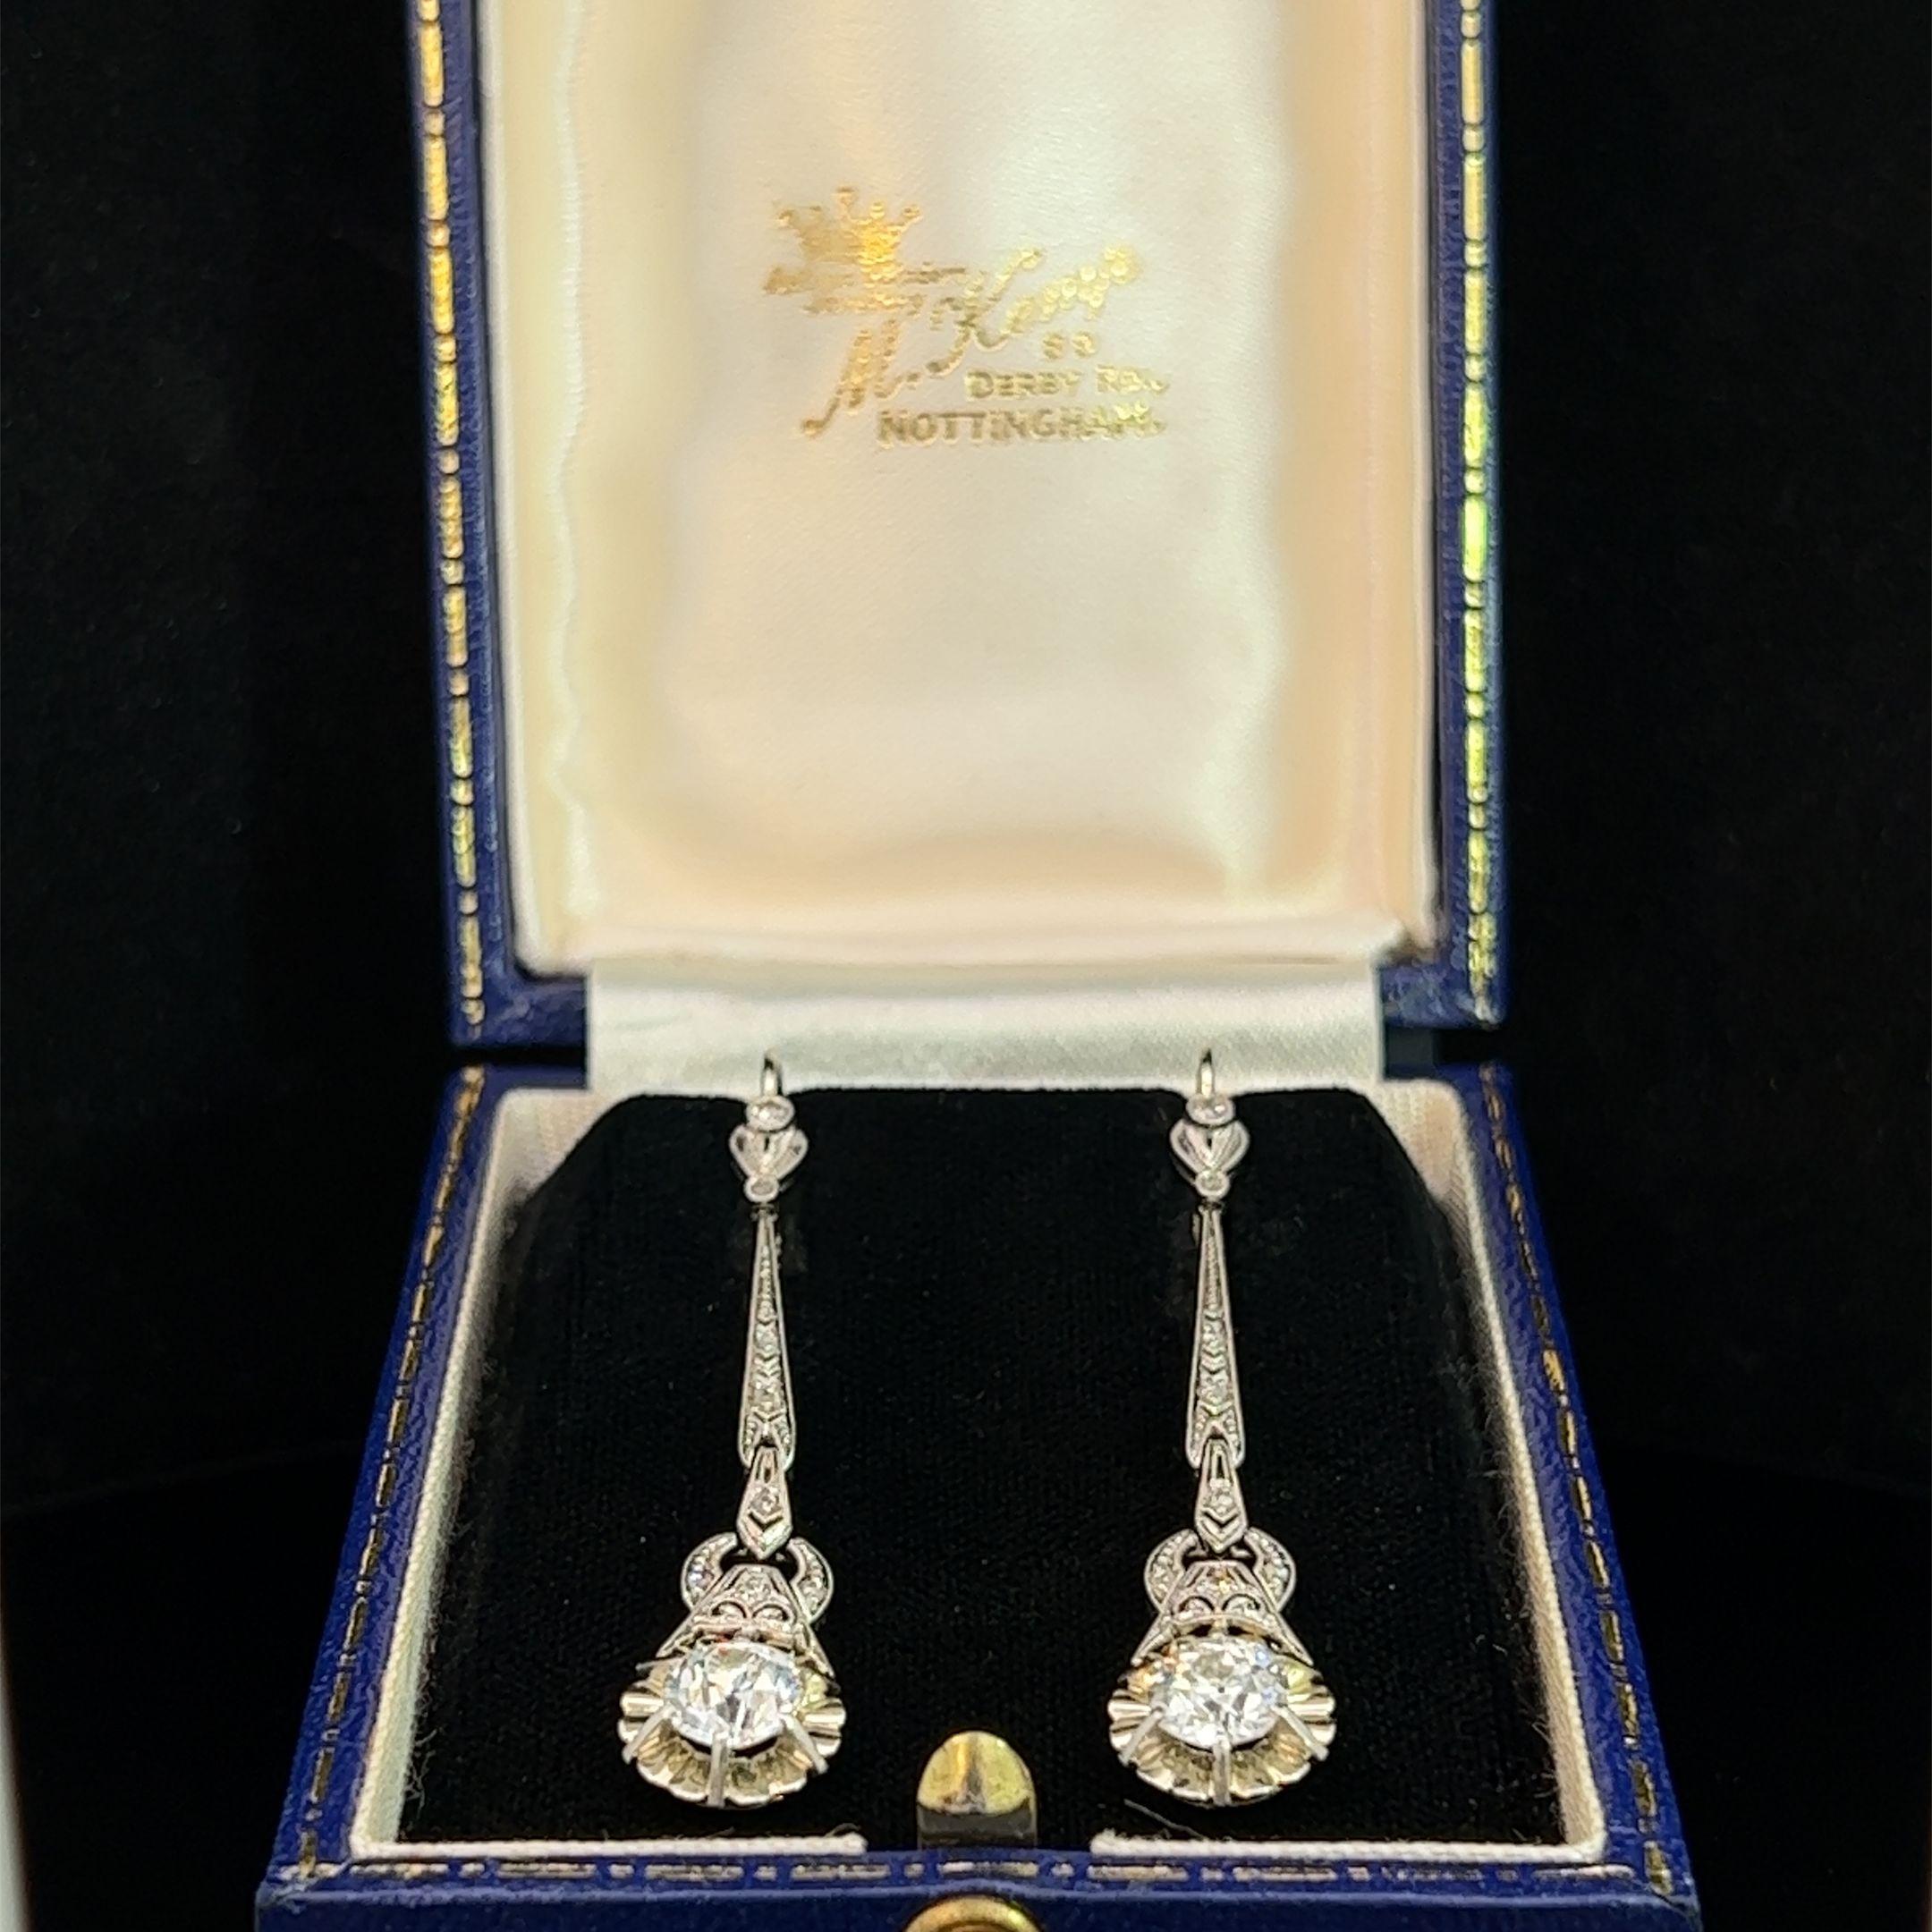 A pair of 18ct & Platinum, diamond set, Art Deco drop earrings. Each earring is claw set at the base with an Early European Brilliant Cut Diamond on an articulated long drop set with single and rose cut diamonds, fitted with continental